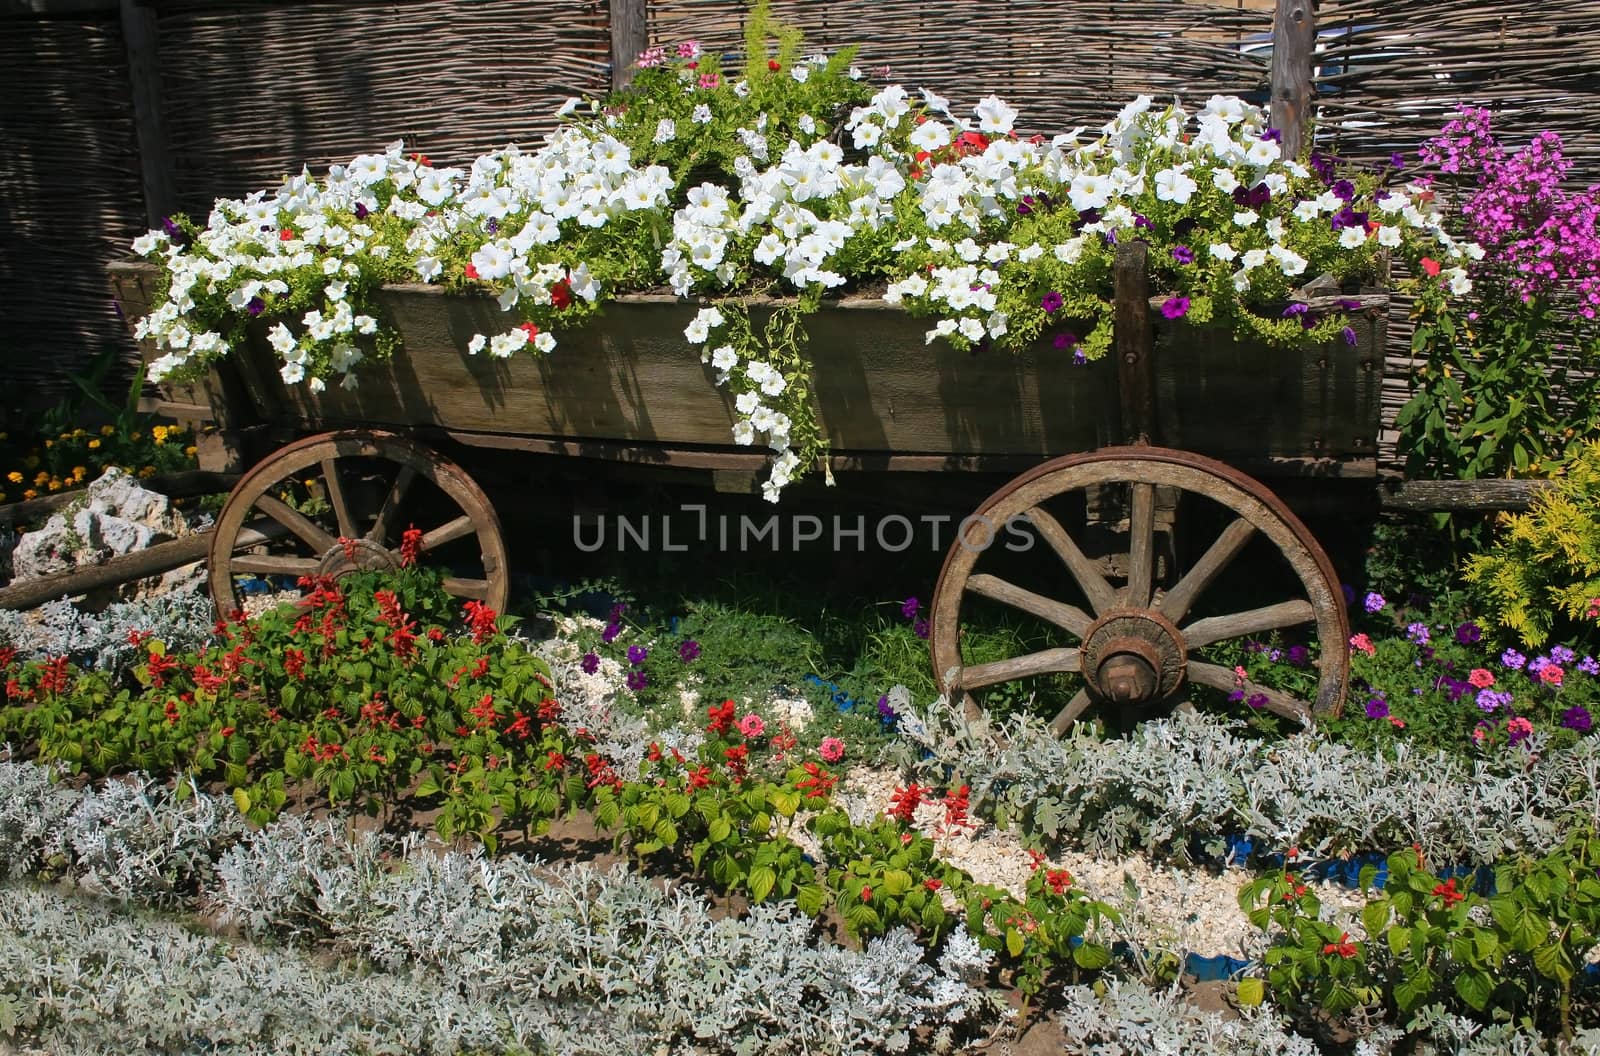 Bed with flowers issued old rural style by yurii_bizgaimer